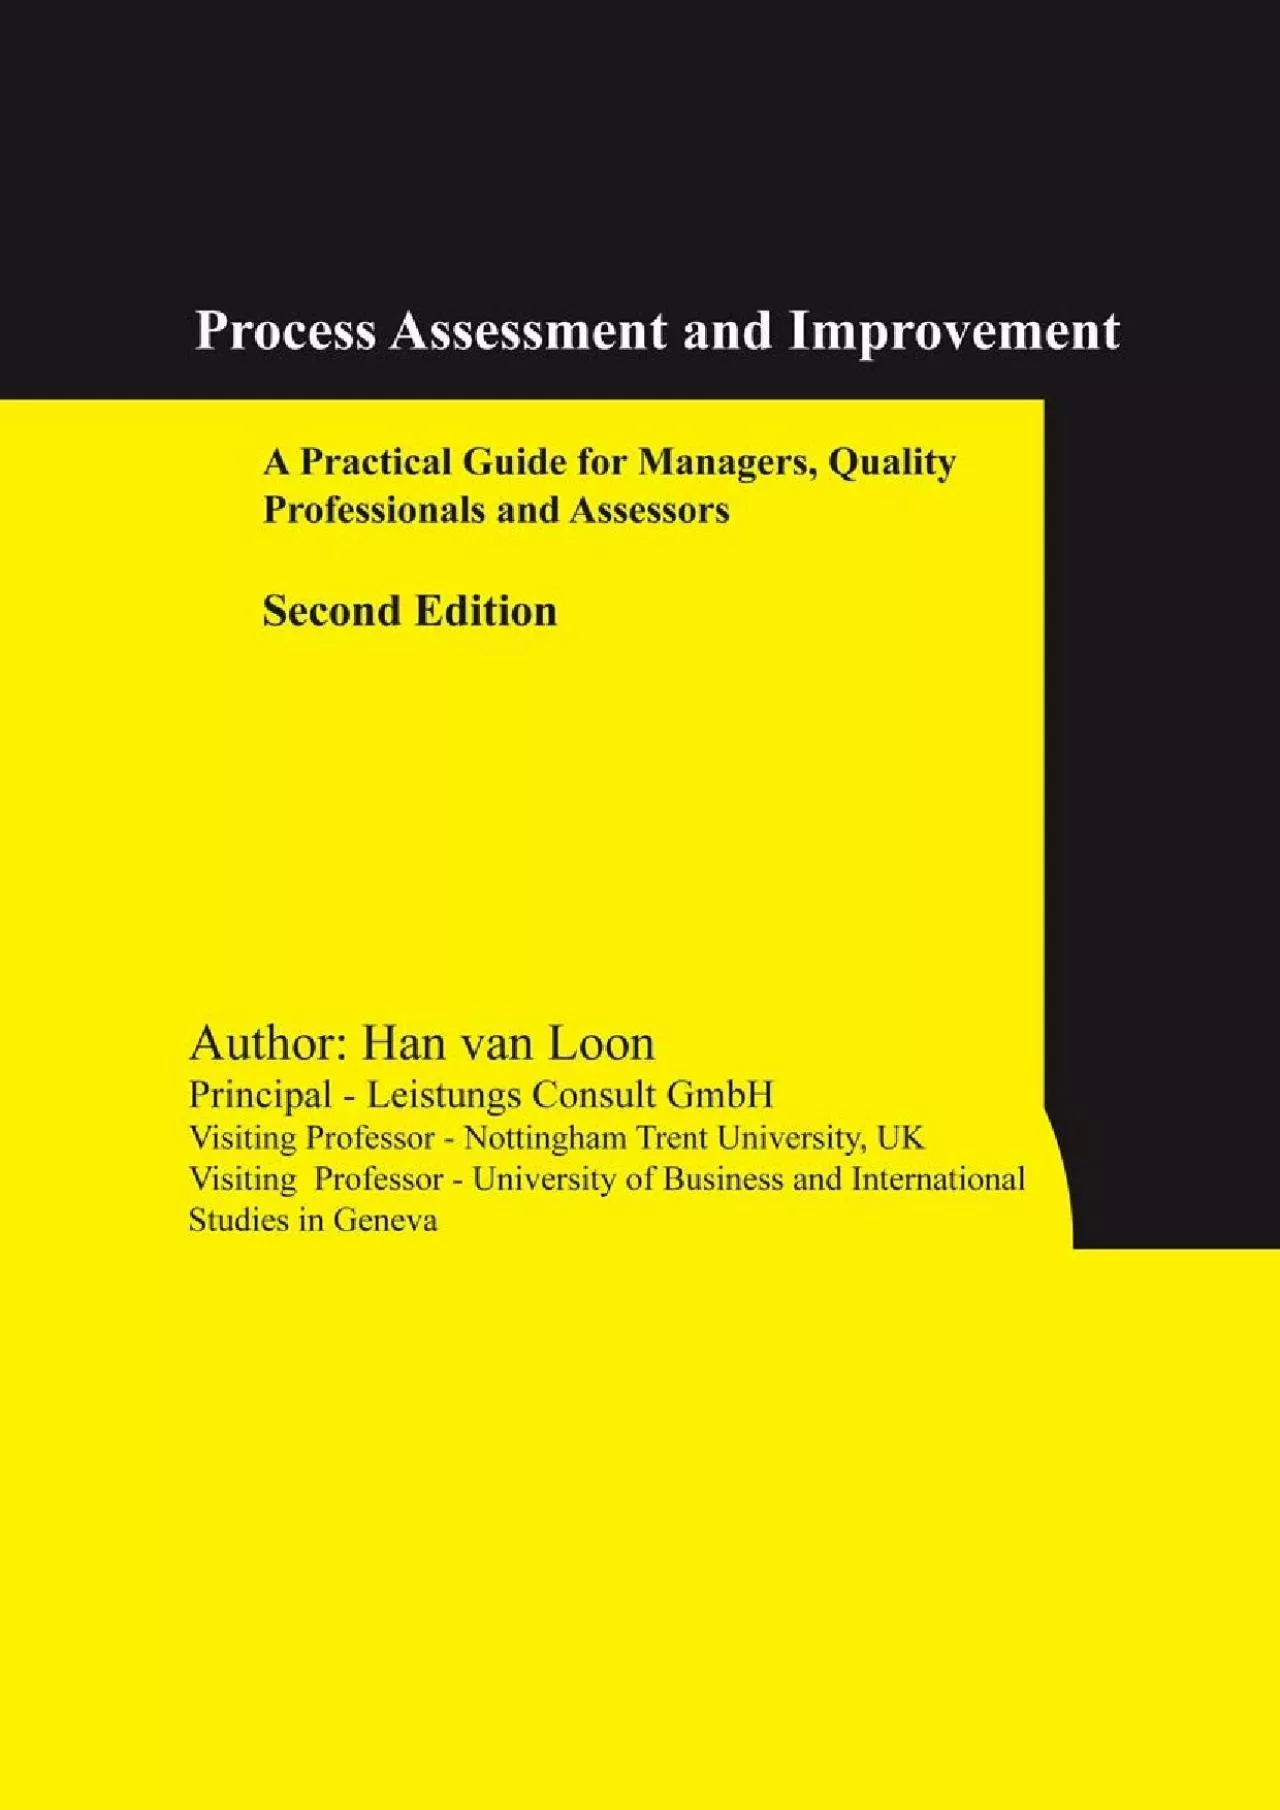 [READING BOOK]-Process Assessment and Improvement: A Practical Guide